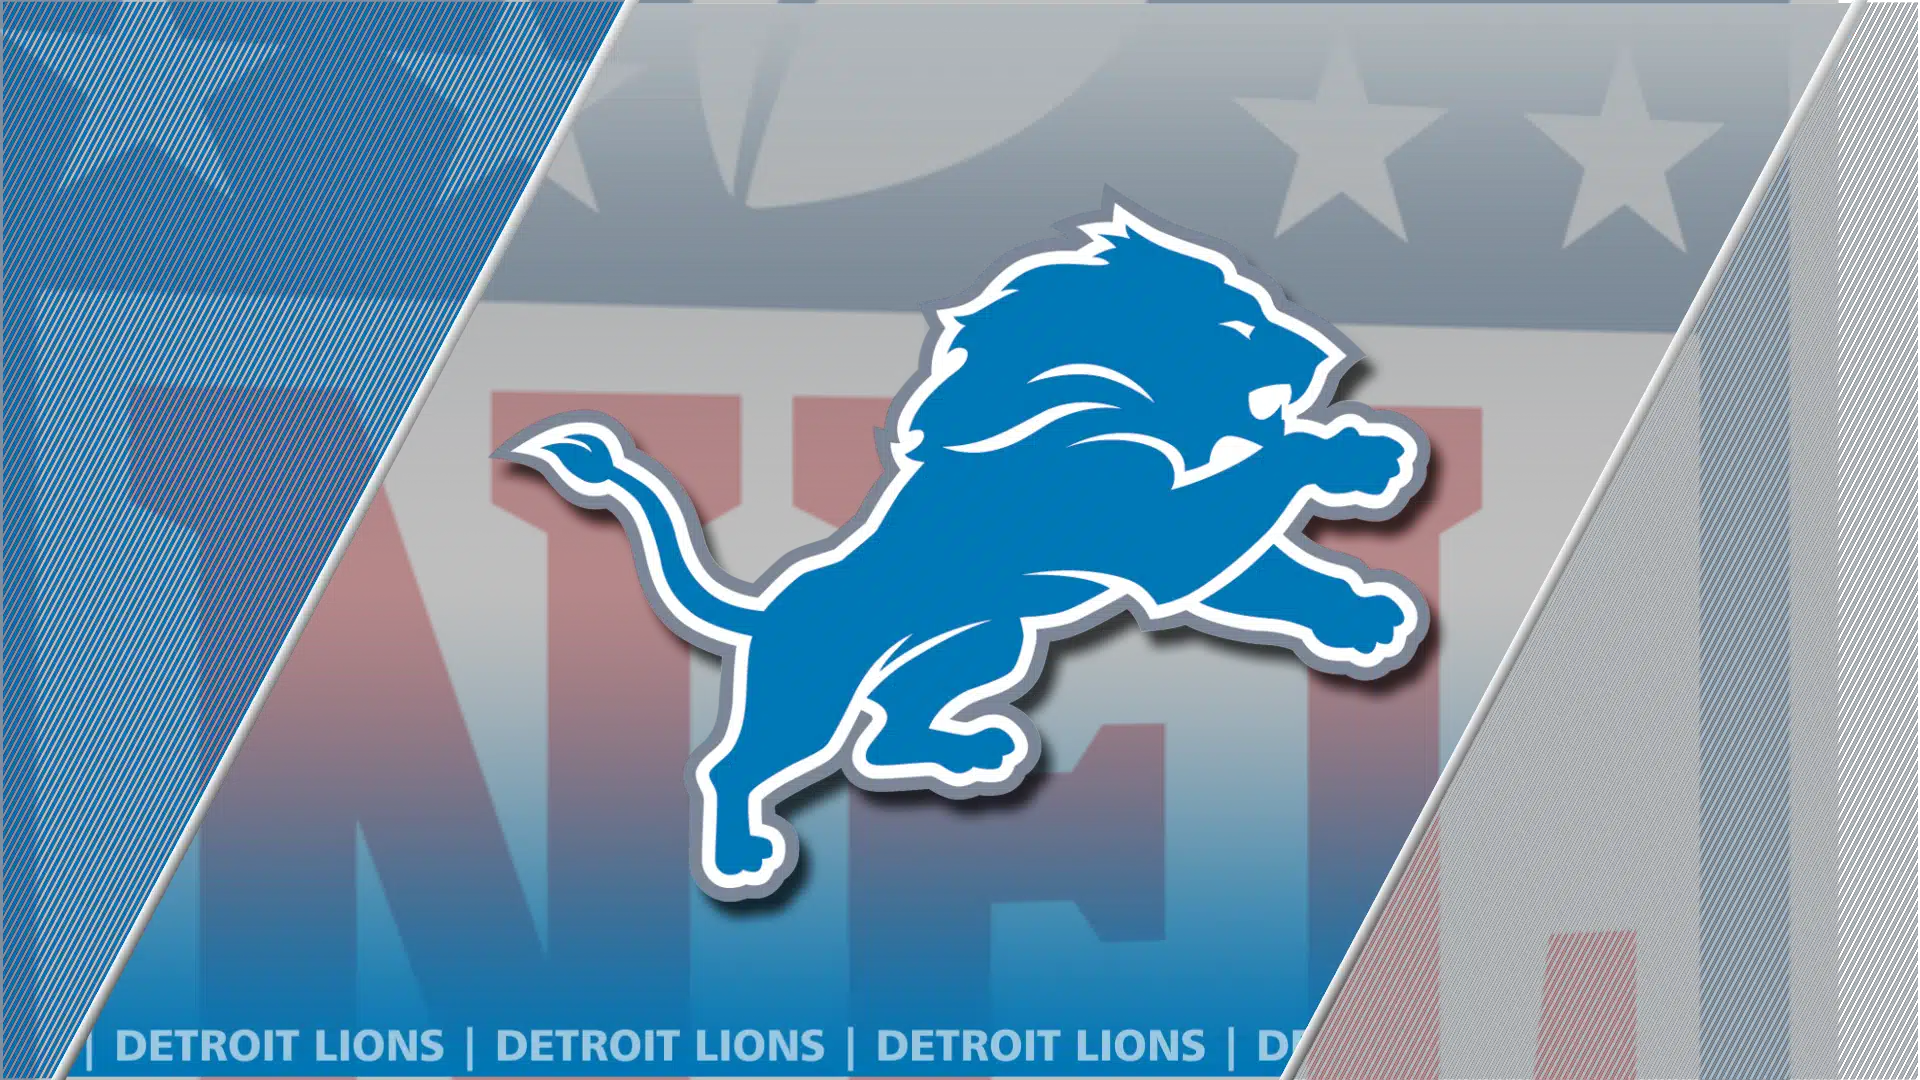 2023 Detroit Lions Training Camp Battles Todd McShay 2023 NFL Draft Germany Chiefs Dave Birkett Bobby Wagner NFLPA Report Card NFL Scouting Combine Detroit Lions free agency 2023 NFL Mock Draft Detroit Lions cap space C.J. Moore 2023 NFC North Odds Brodric Martin Rick Spielman Germain Ifedi Pro Football Focus Wayne Blair Dan Campbell Shane Zylstra Jarren Williams Detroit Lions waive Tae Hayes Detroit Lions Roster Moves